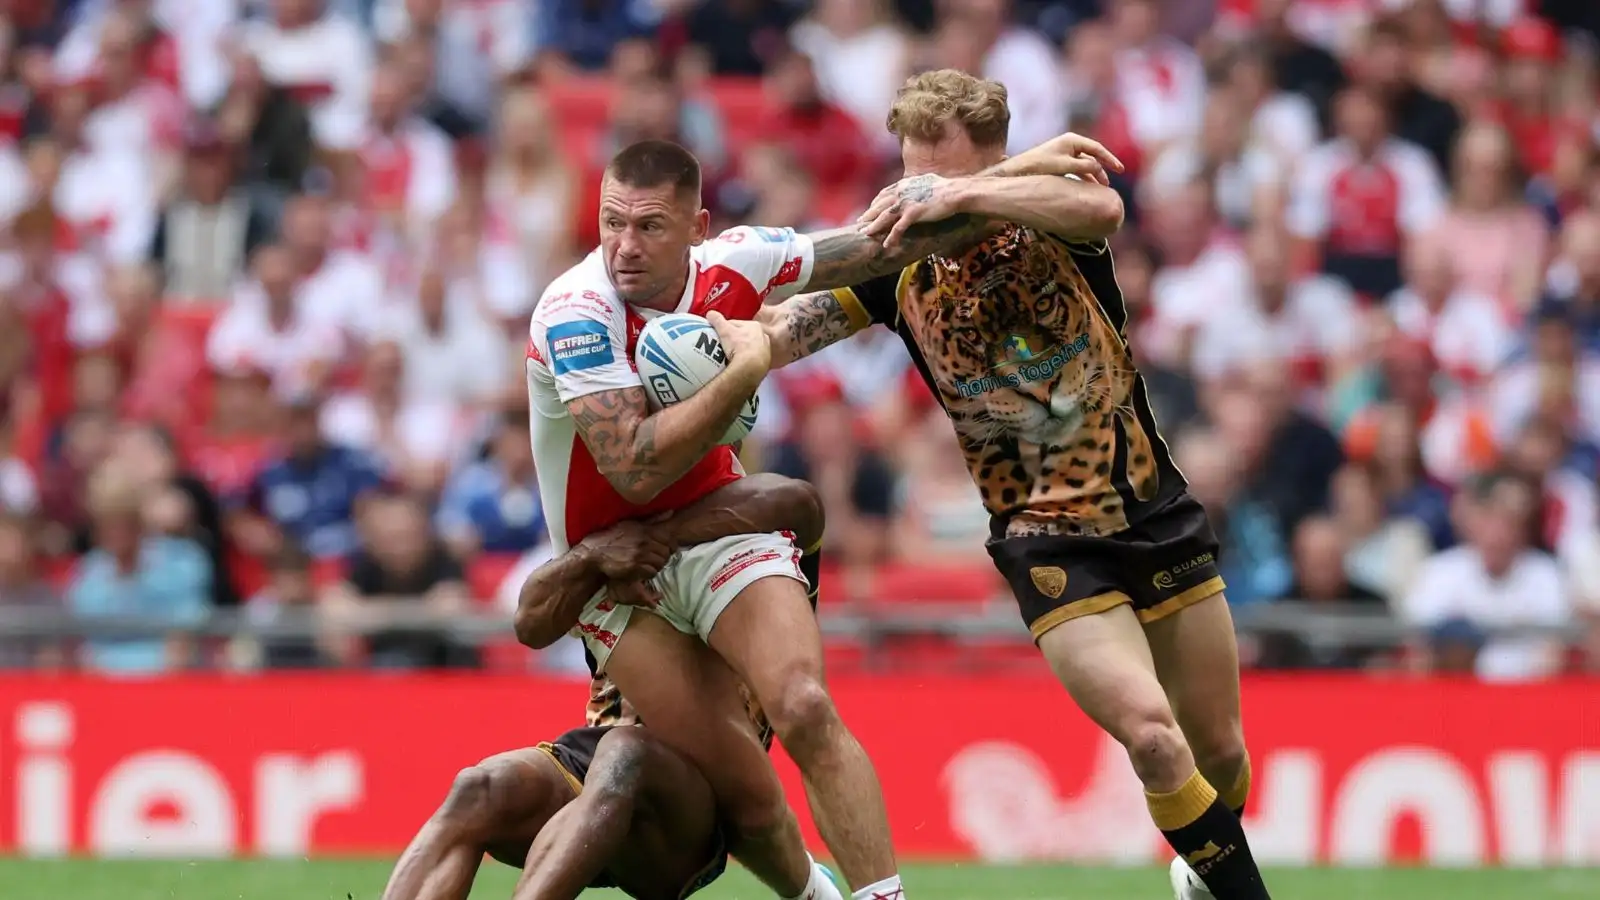 Hull KR player ratings: Skipper stands out but mistakes cost in disappointing afternoon at Wembley